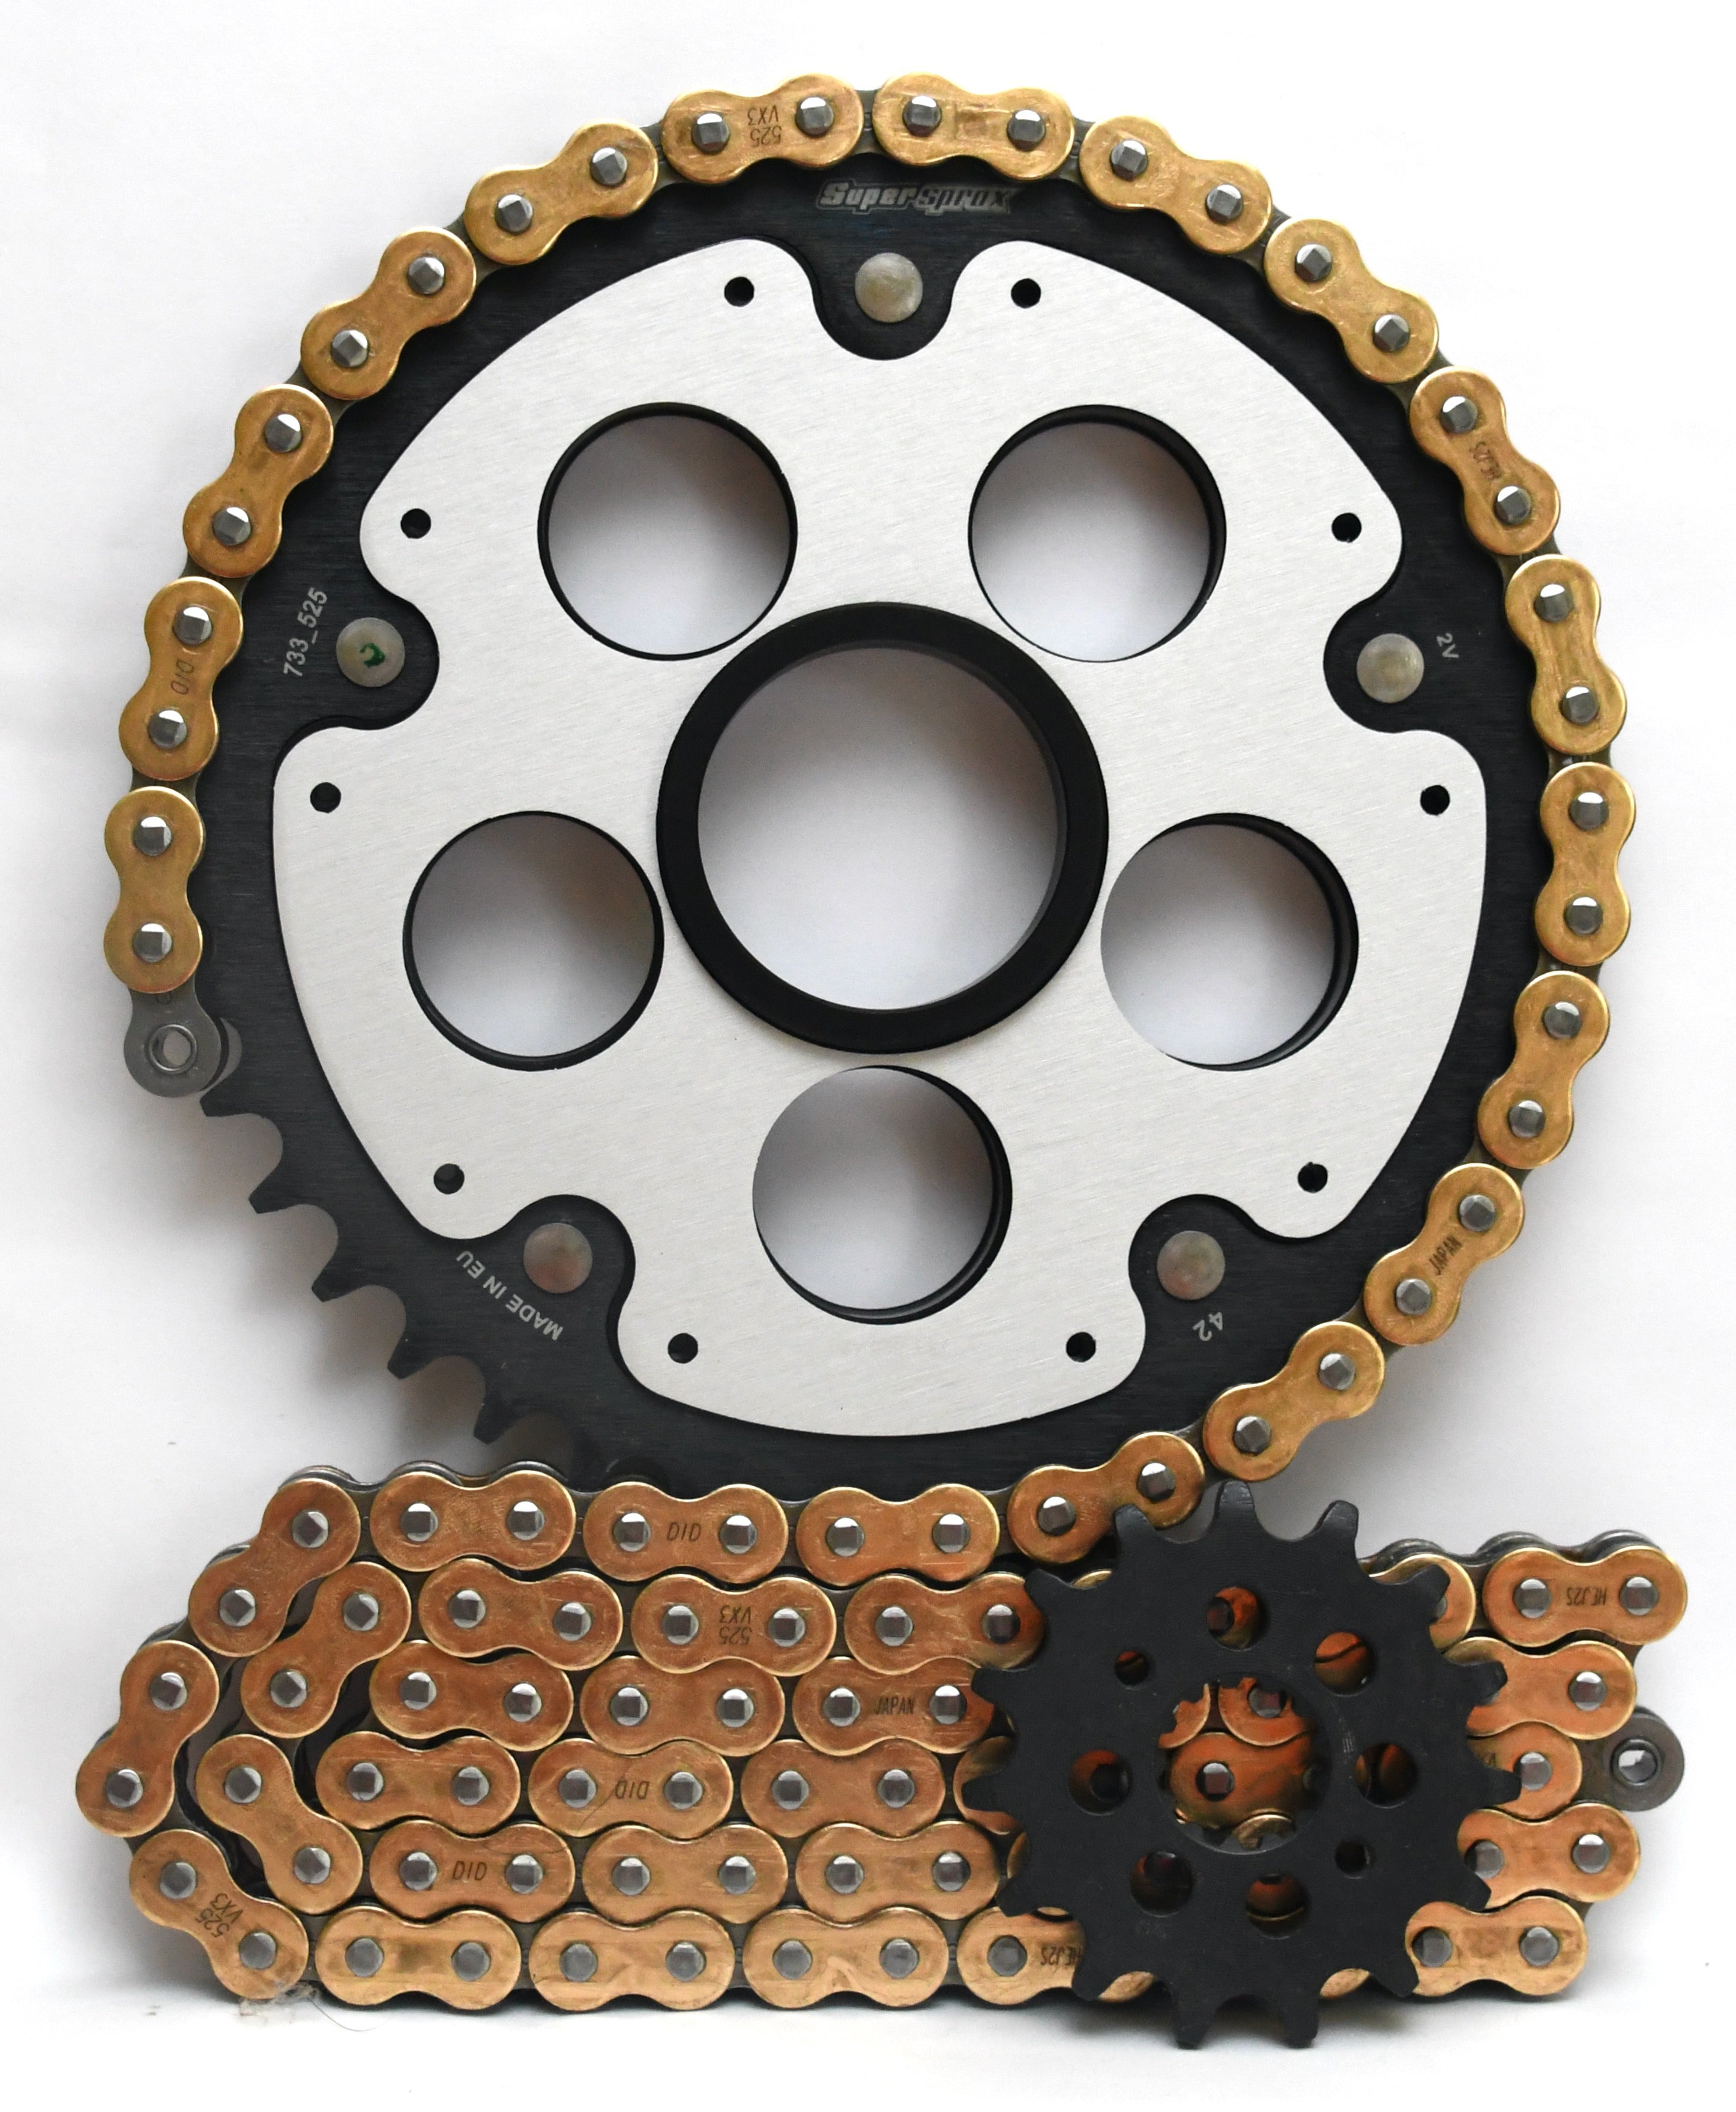 Supersprox Chain & Sprocket Kit for Ducati 1100 Monster (Inc Evo/S) 2009-2013- Standard Gearing